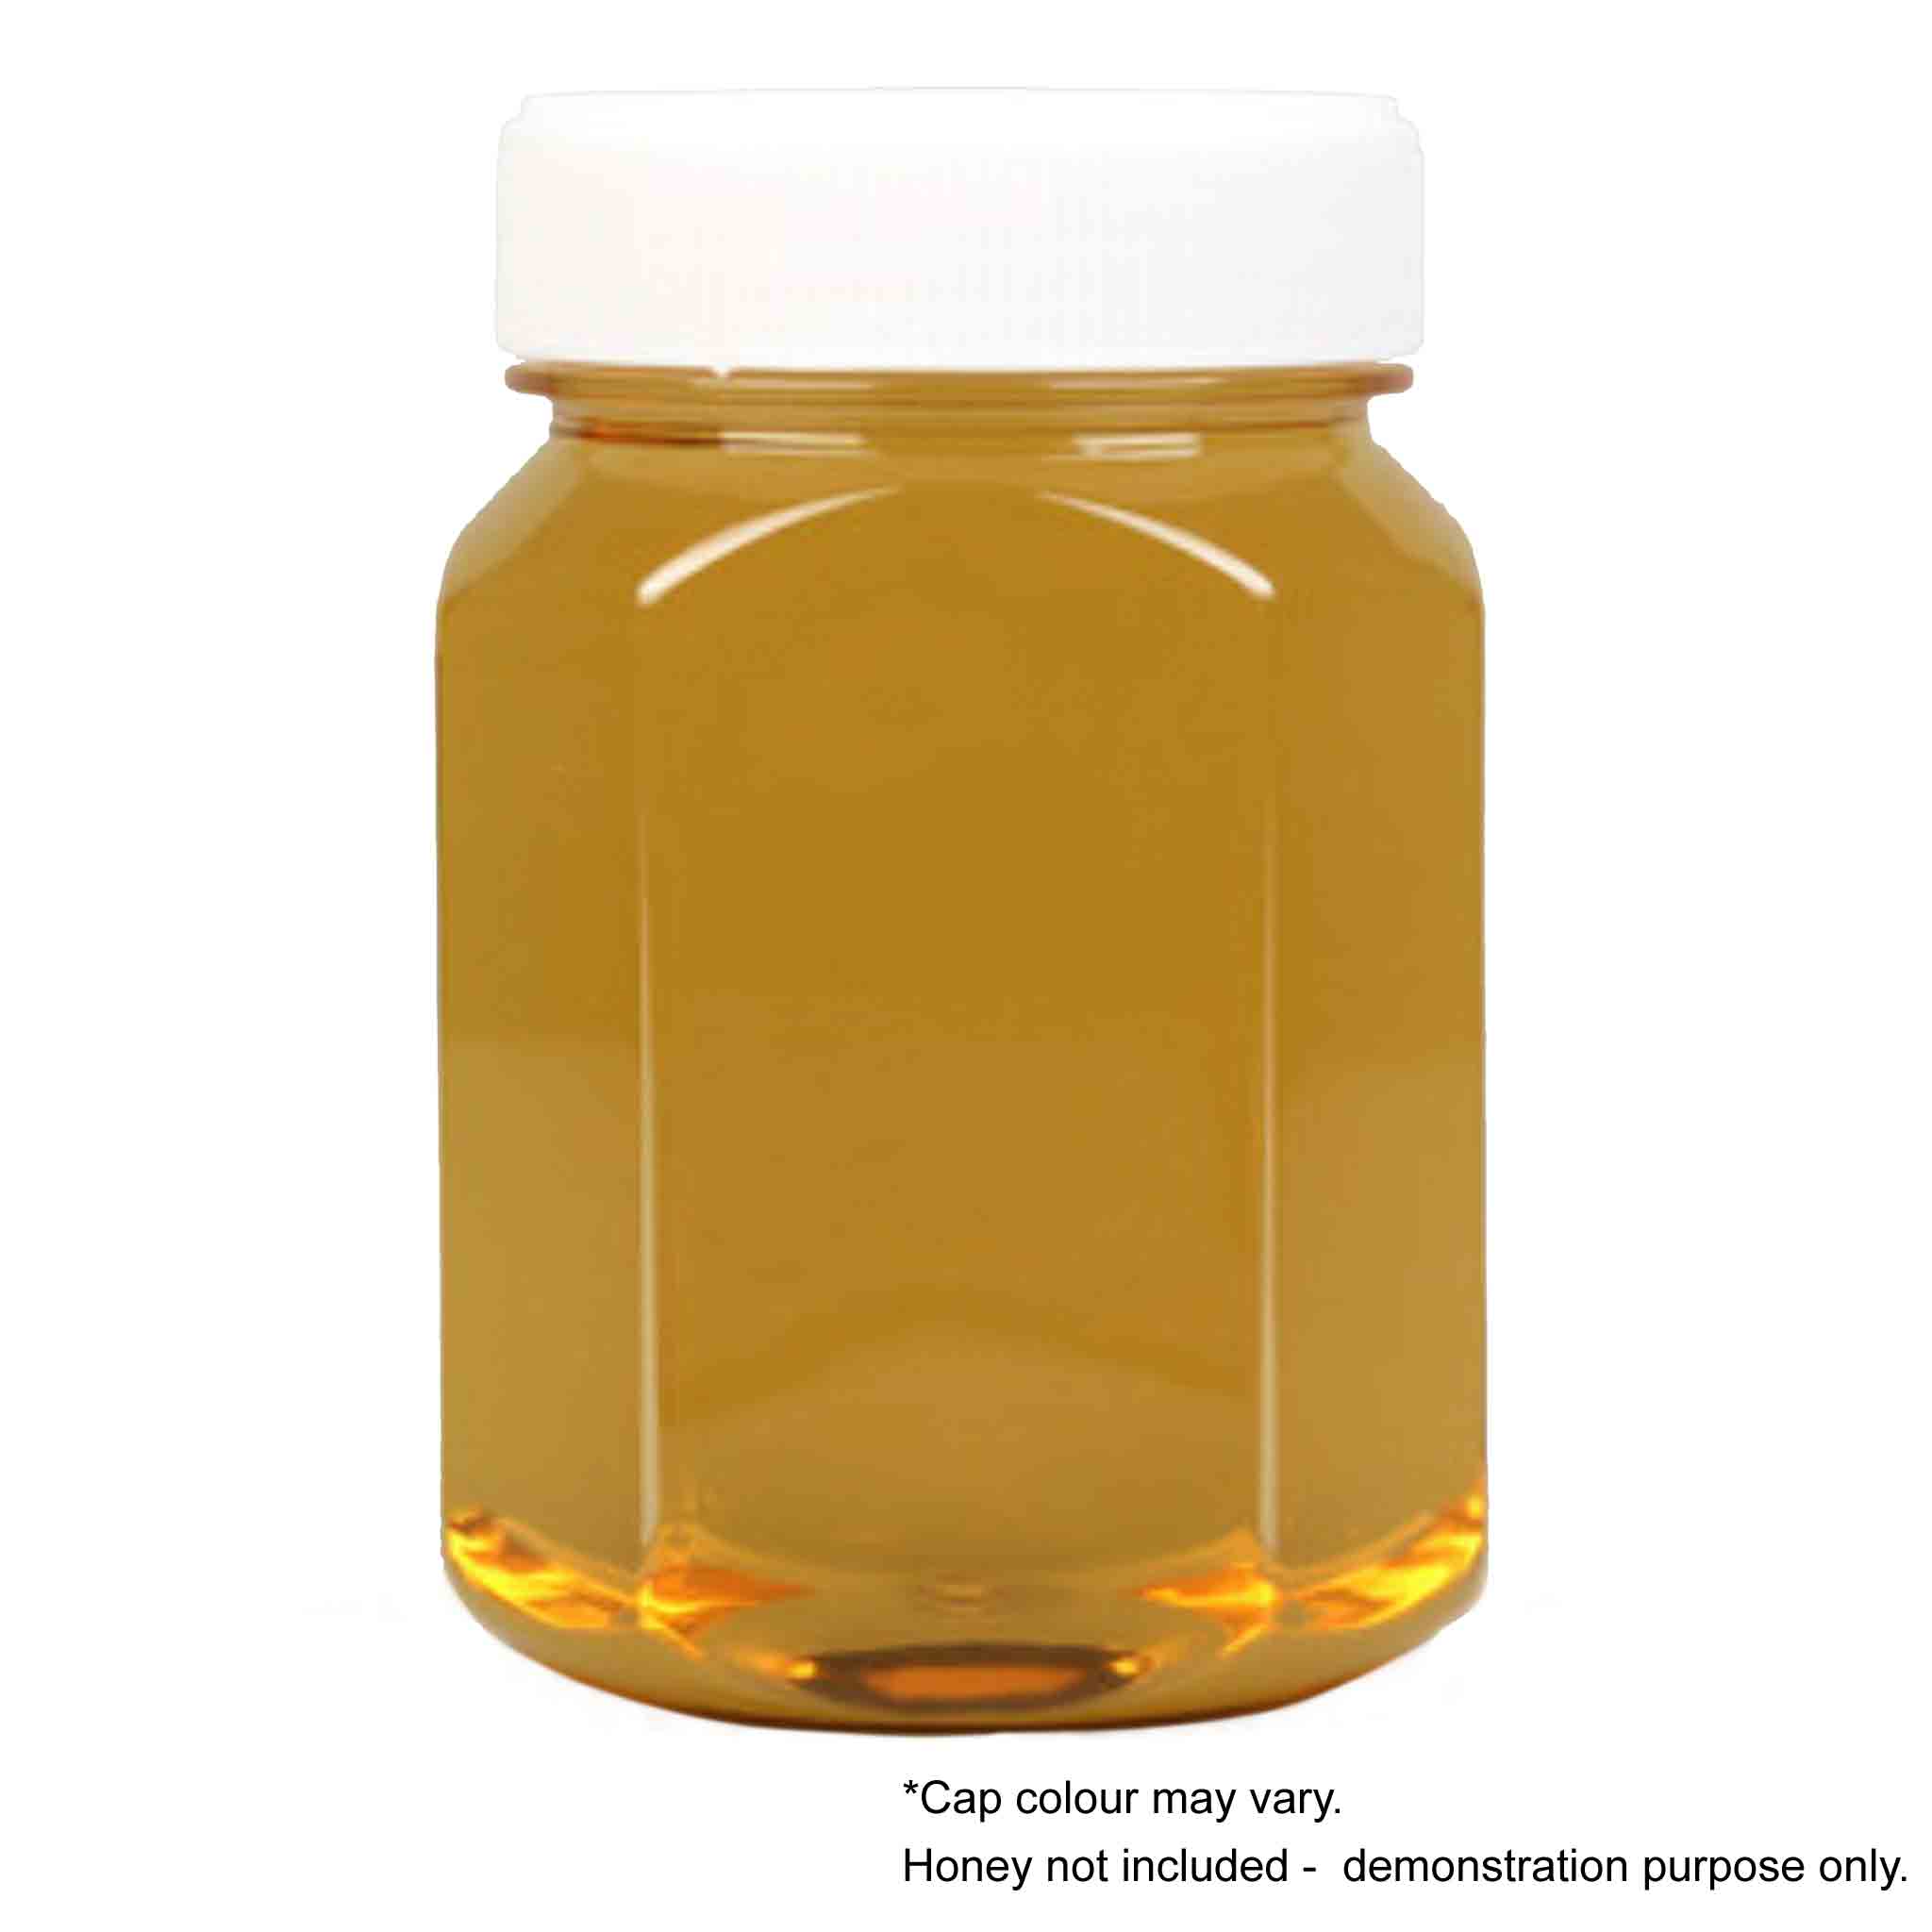 Honey Square Jar - Plastic (100 Pack) - Processing collection by Buzzbee Beekeeping Supplies